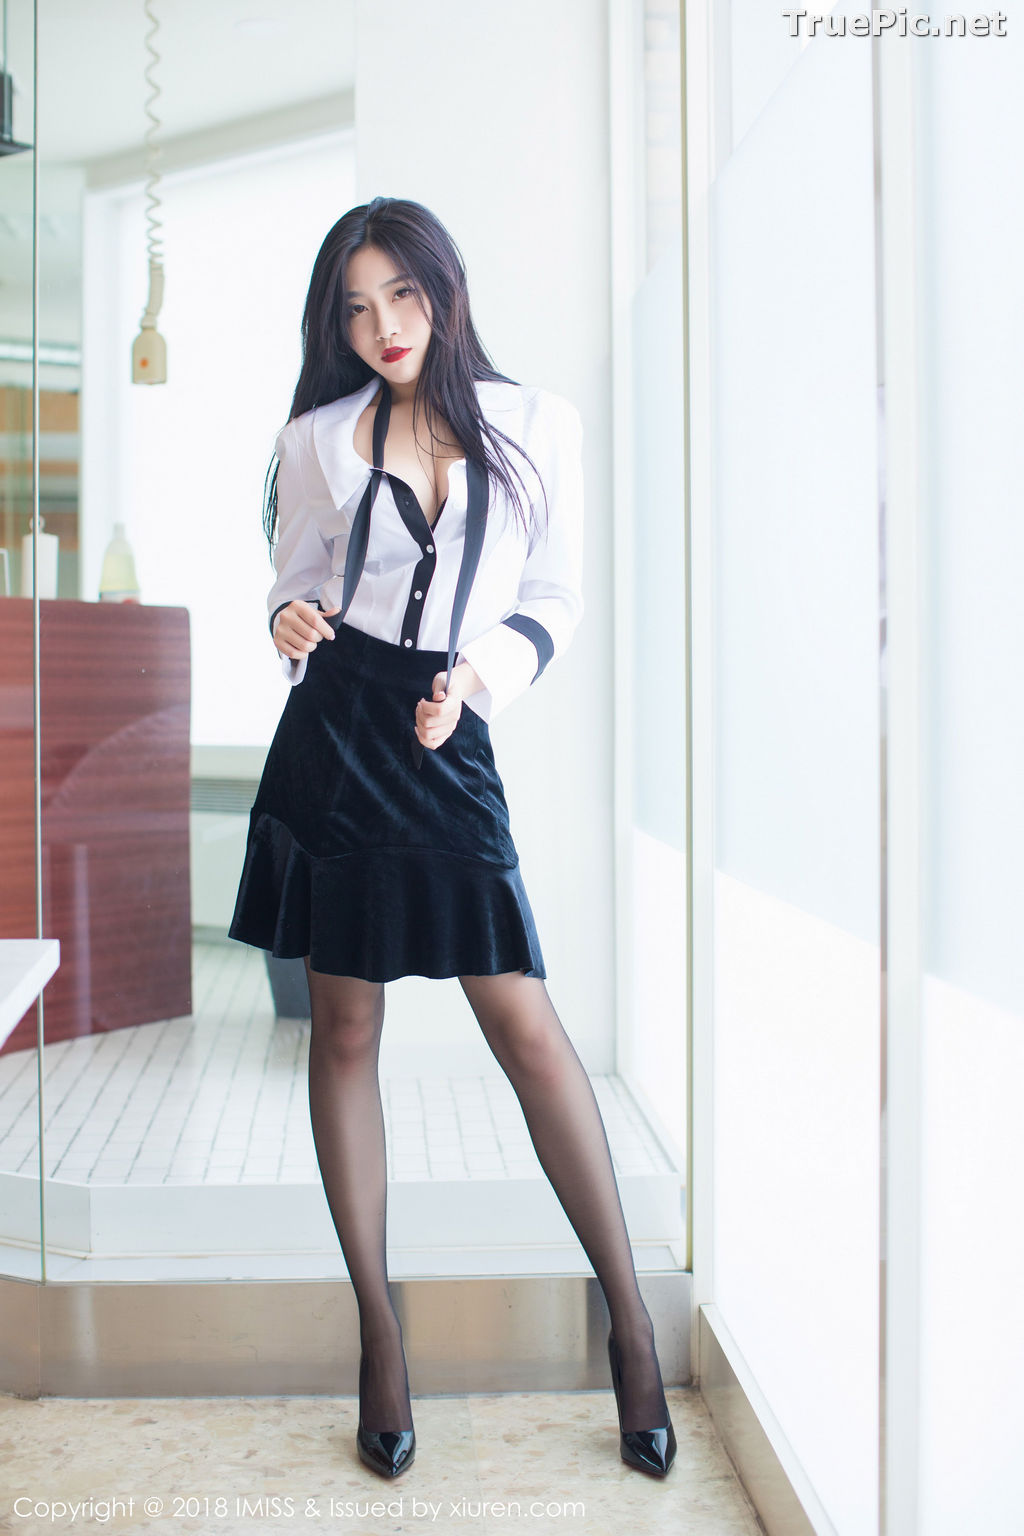 Image IMISS Vol.239 - Chinese Model - Sabrina (Xu Nuo 许诺) - Office Girl - TruePic.net - Picture-34